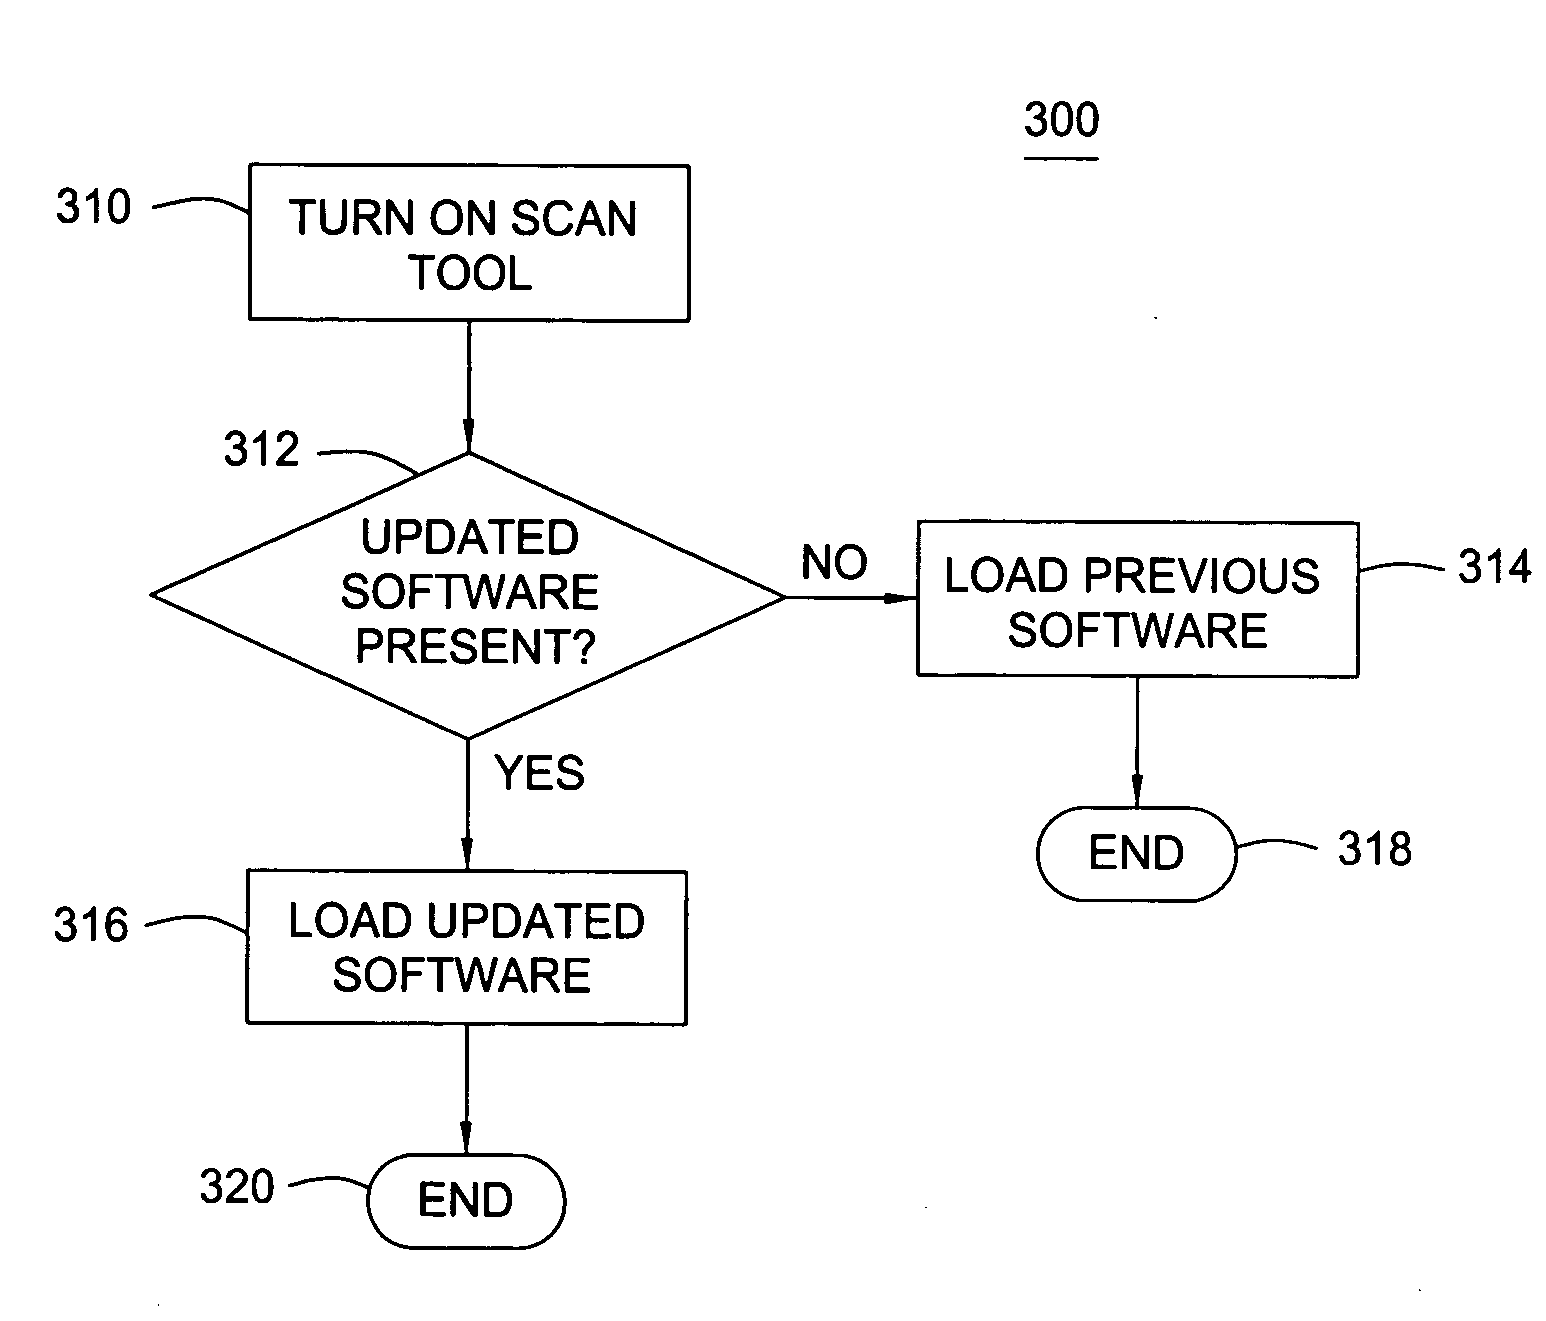 Method for having multiple software programs on a diagnostic tool